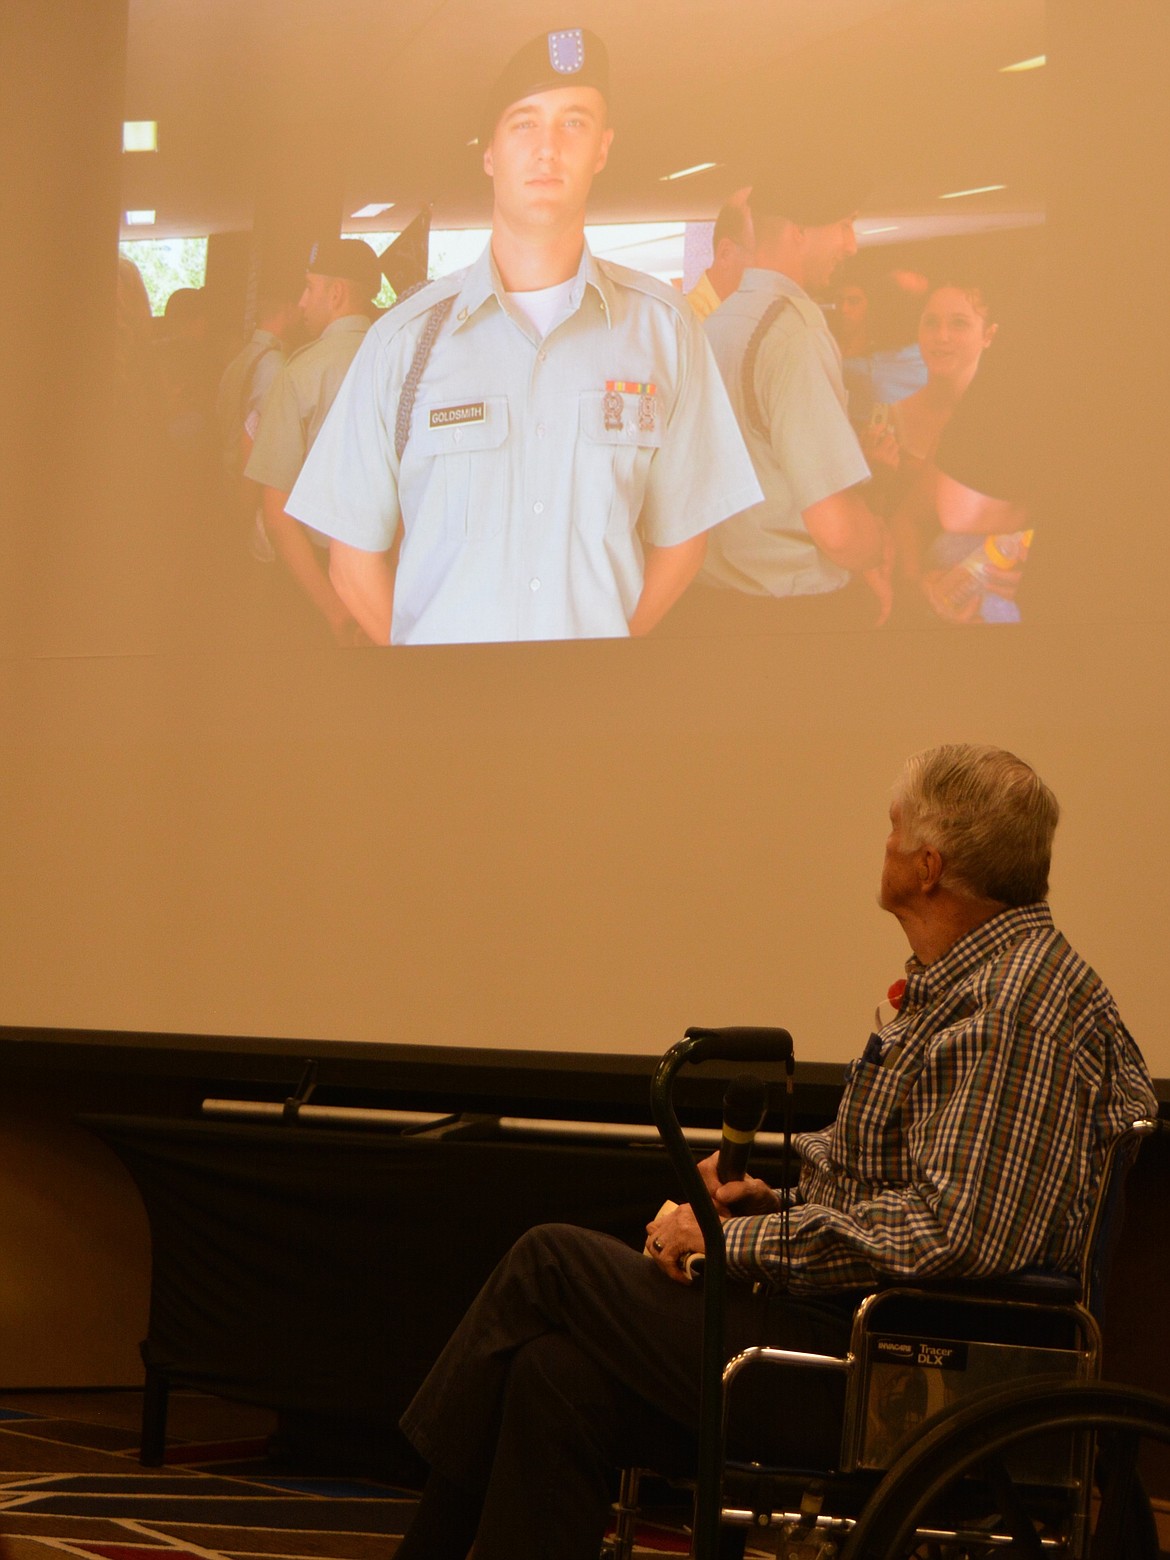 John Goldsmith looks up at a photo of his son, Wyatt Goldsmith wearing his Green Beret regalia, during a slide show as part of a Memorial Day tribute honoring Gold Star families.